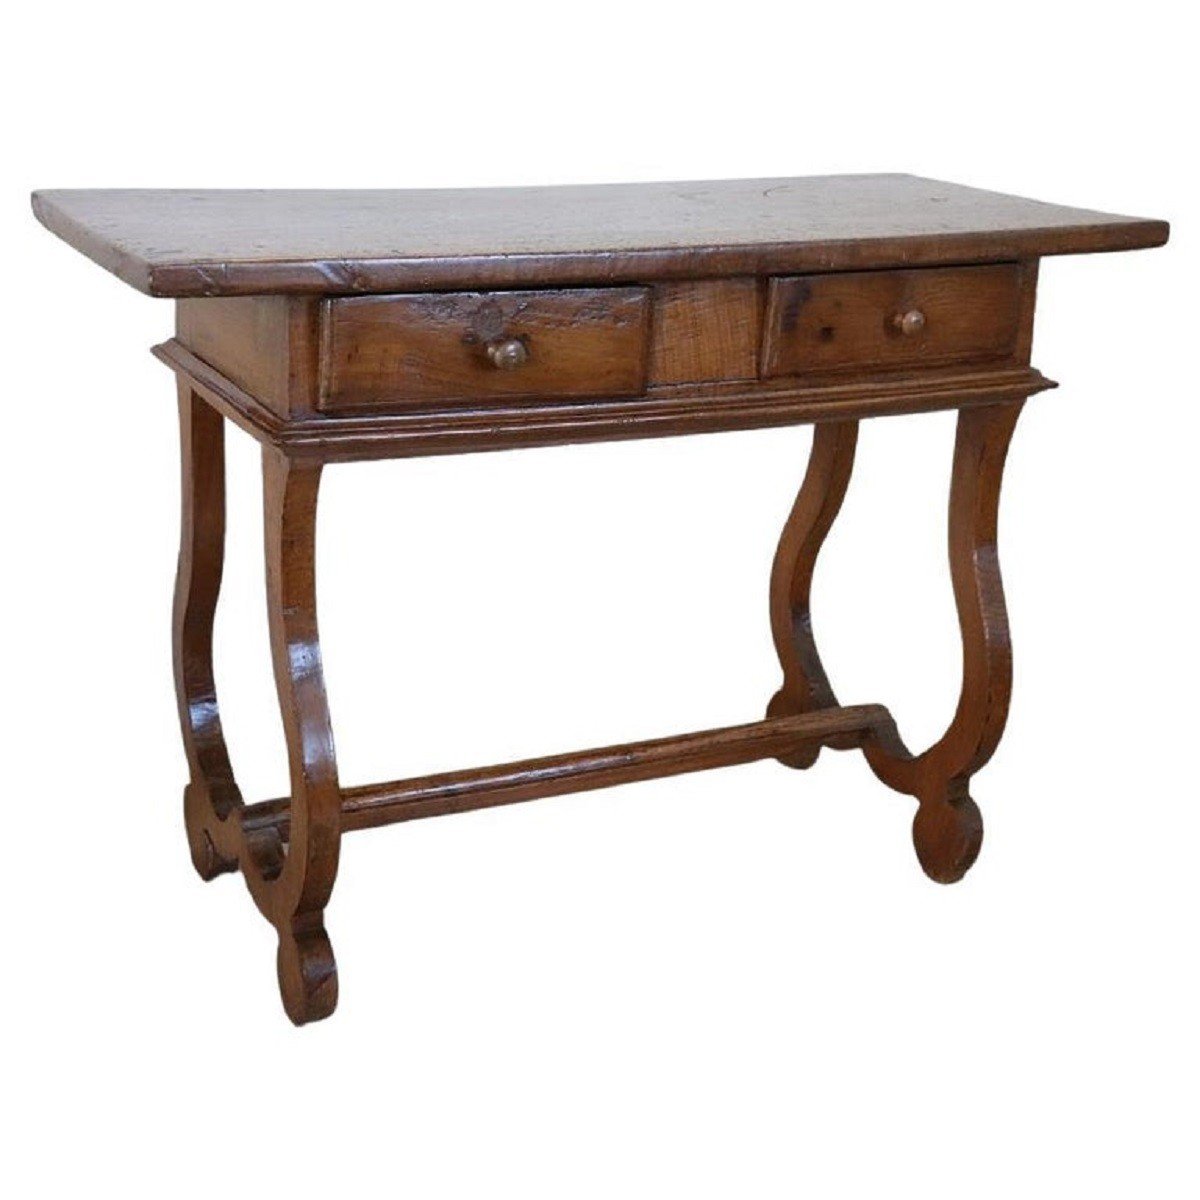 Fratino Table In Oak, 17th Century